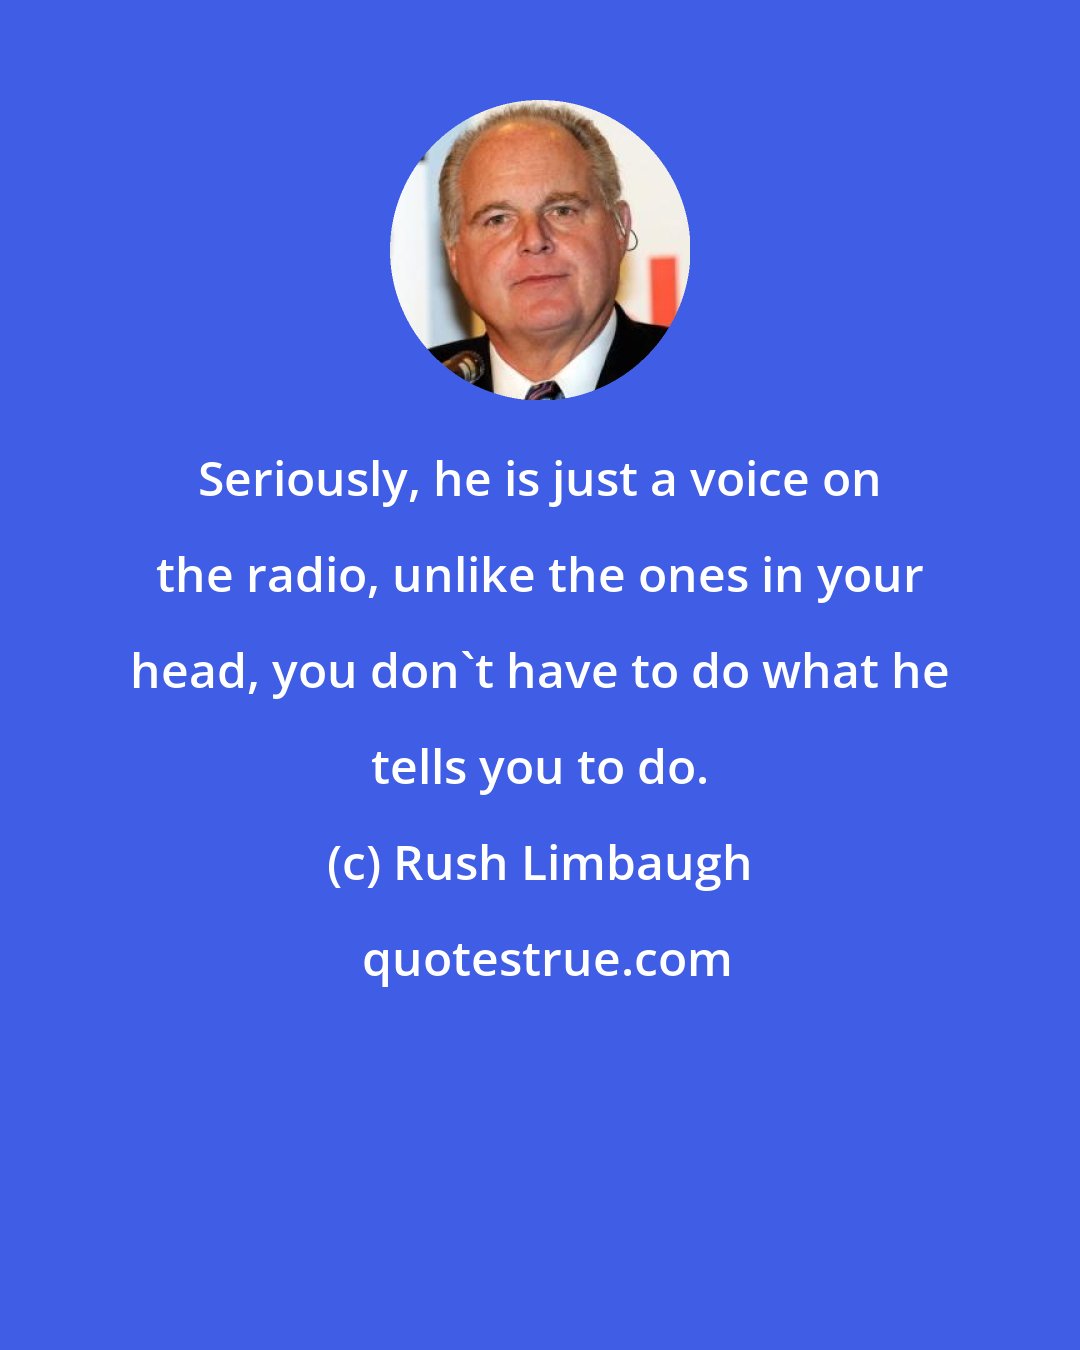 Rush Limbaugh: Seriously, he is just a voice on the radio, unlike the ones in your head, you don't have to do what he tells you to do.